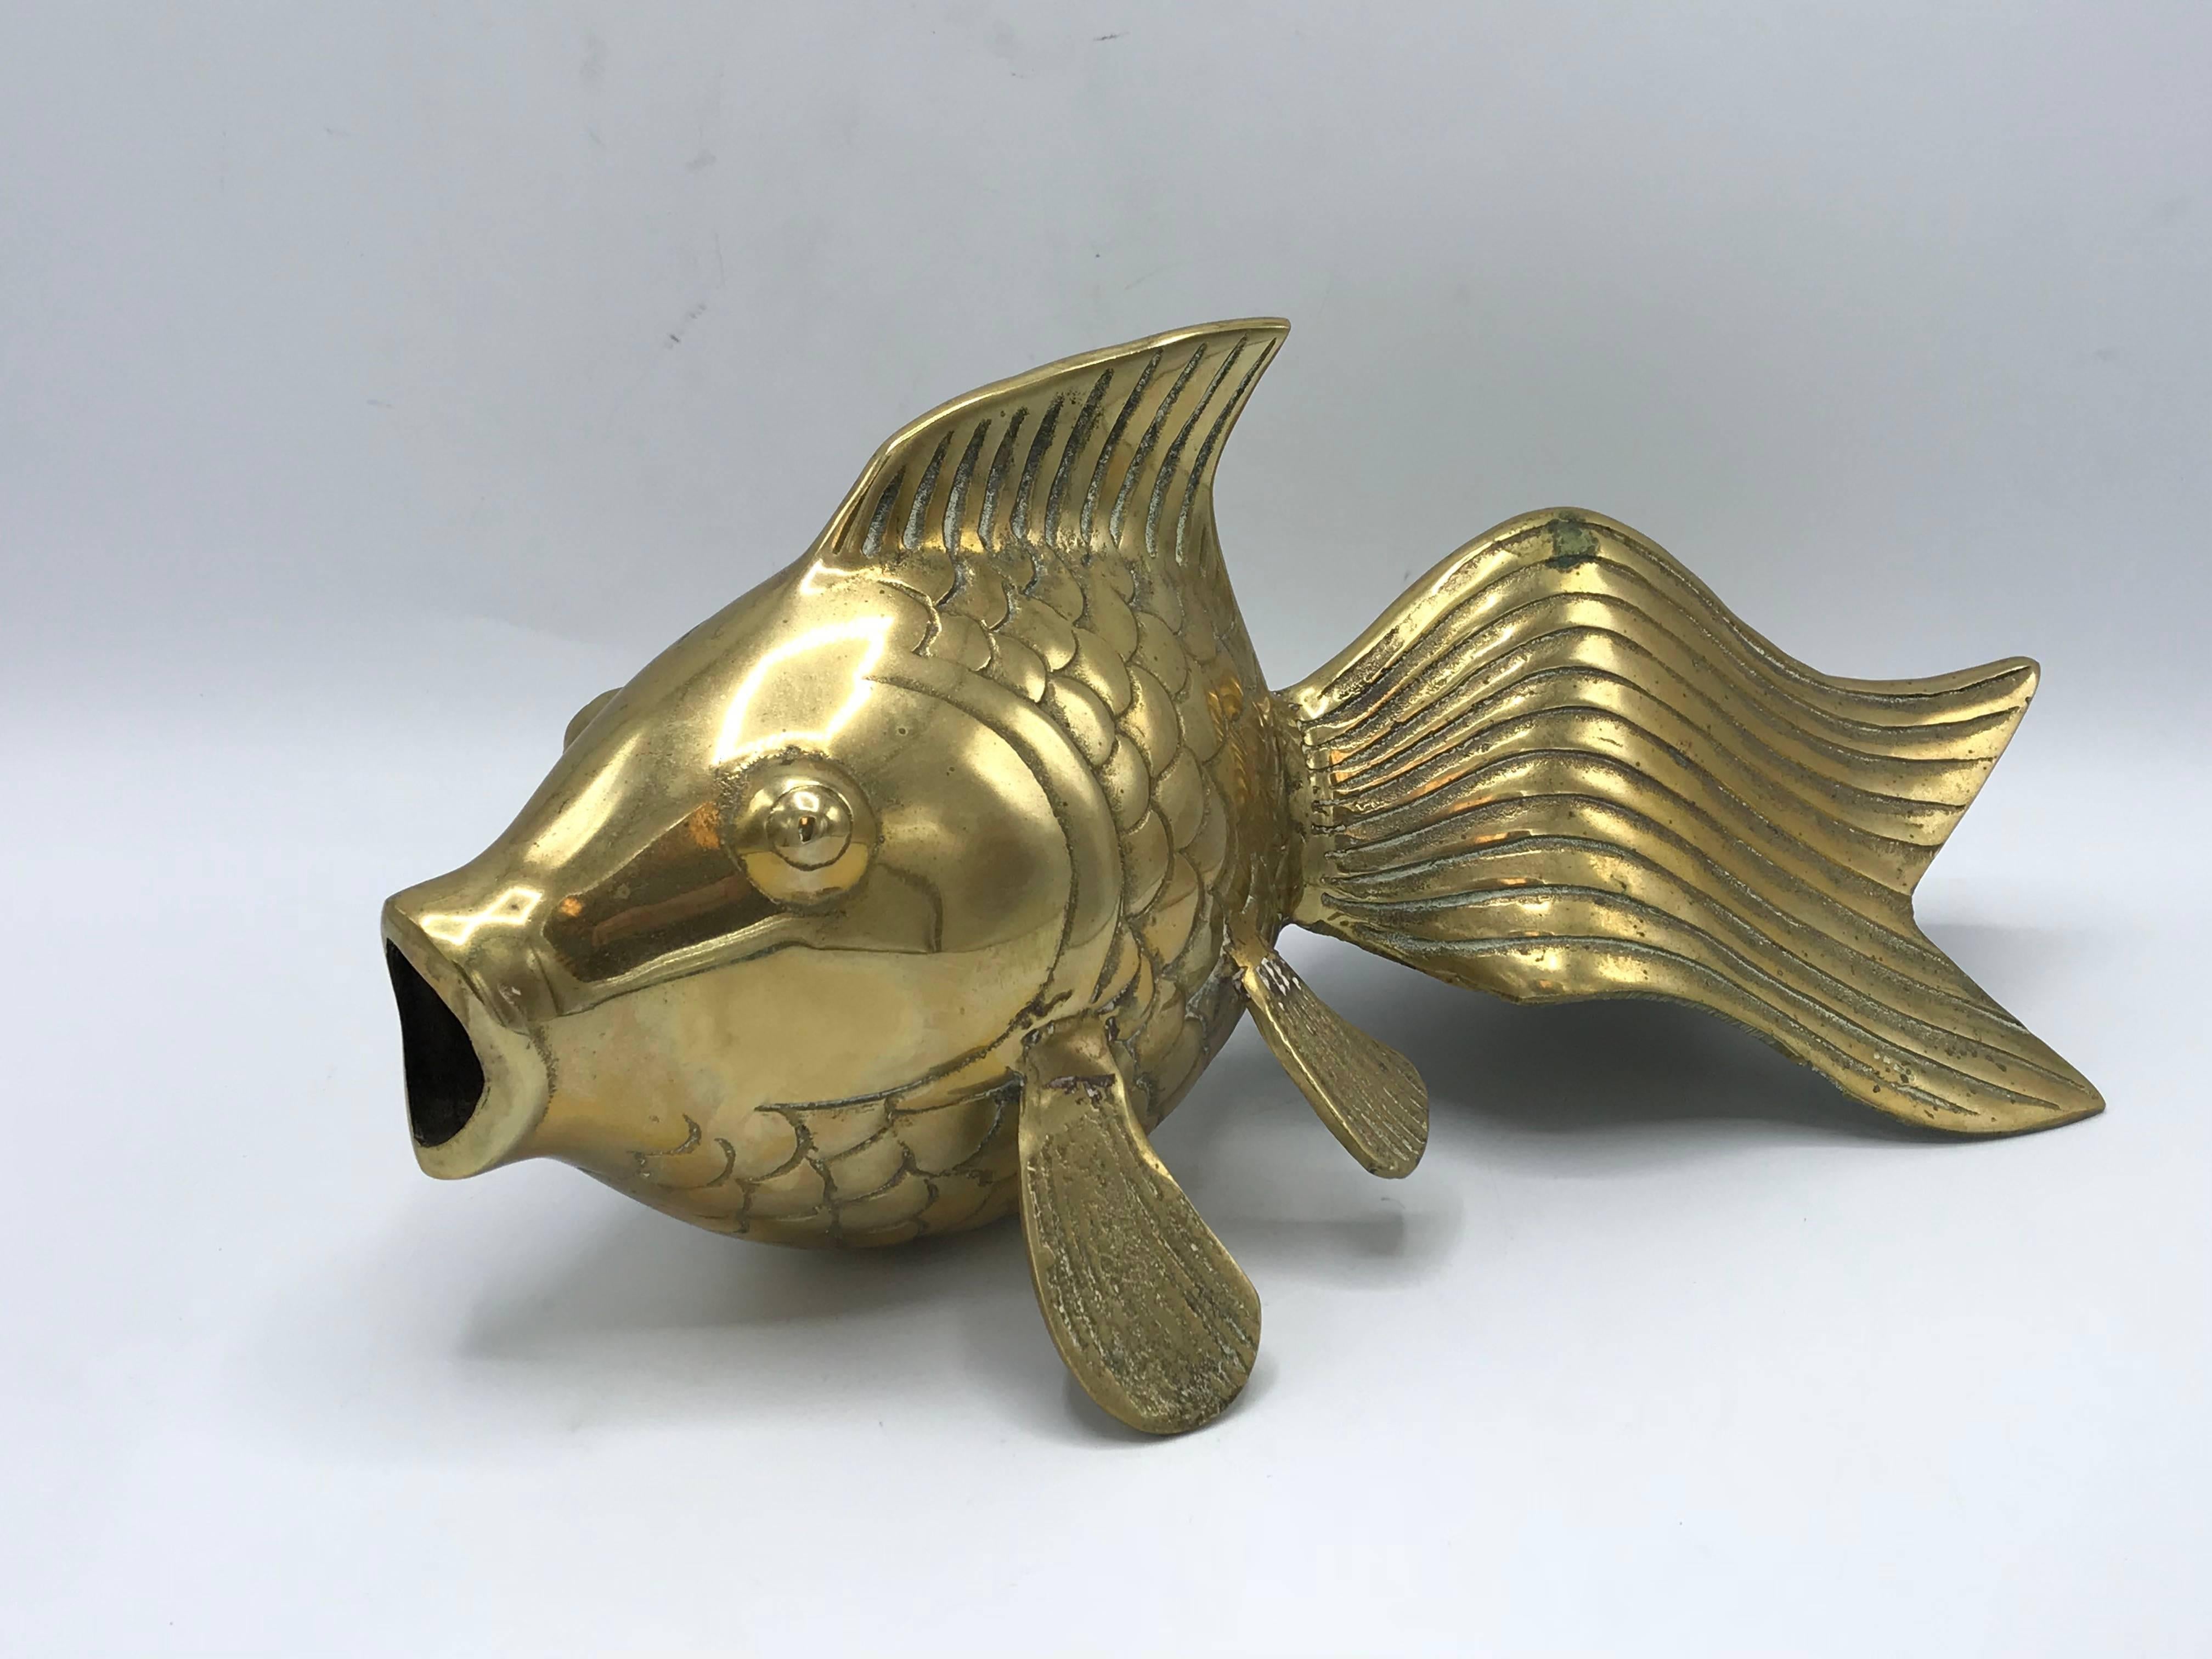 Offered is a beautiful, large, 1970s modern brass koi fish sculpture. Lovely detailing allover. Heavy, weighing 3.10lbs.